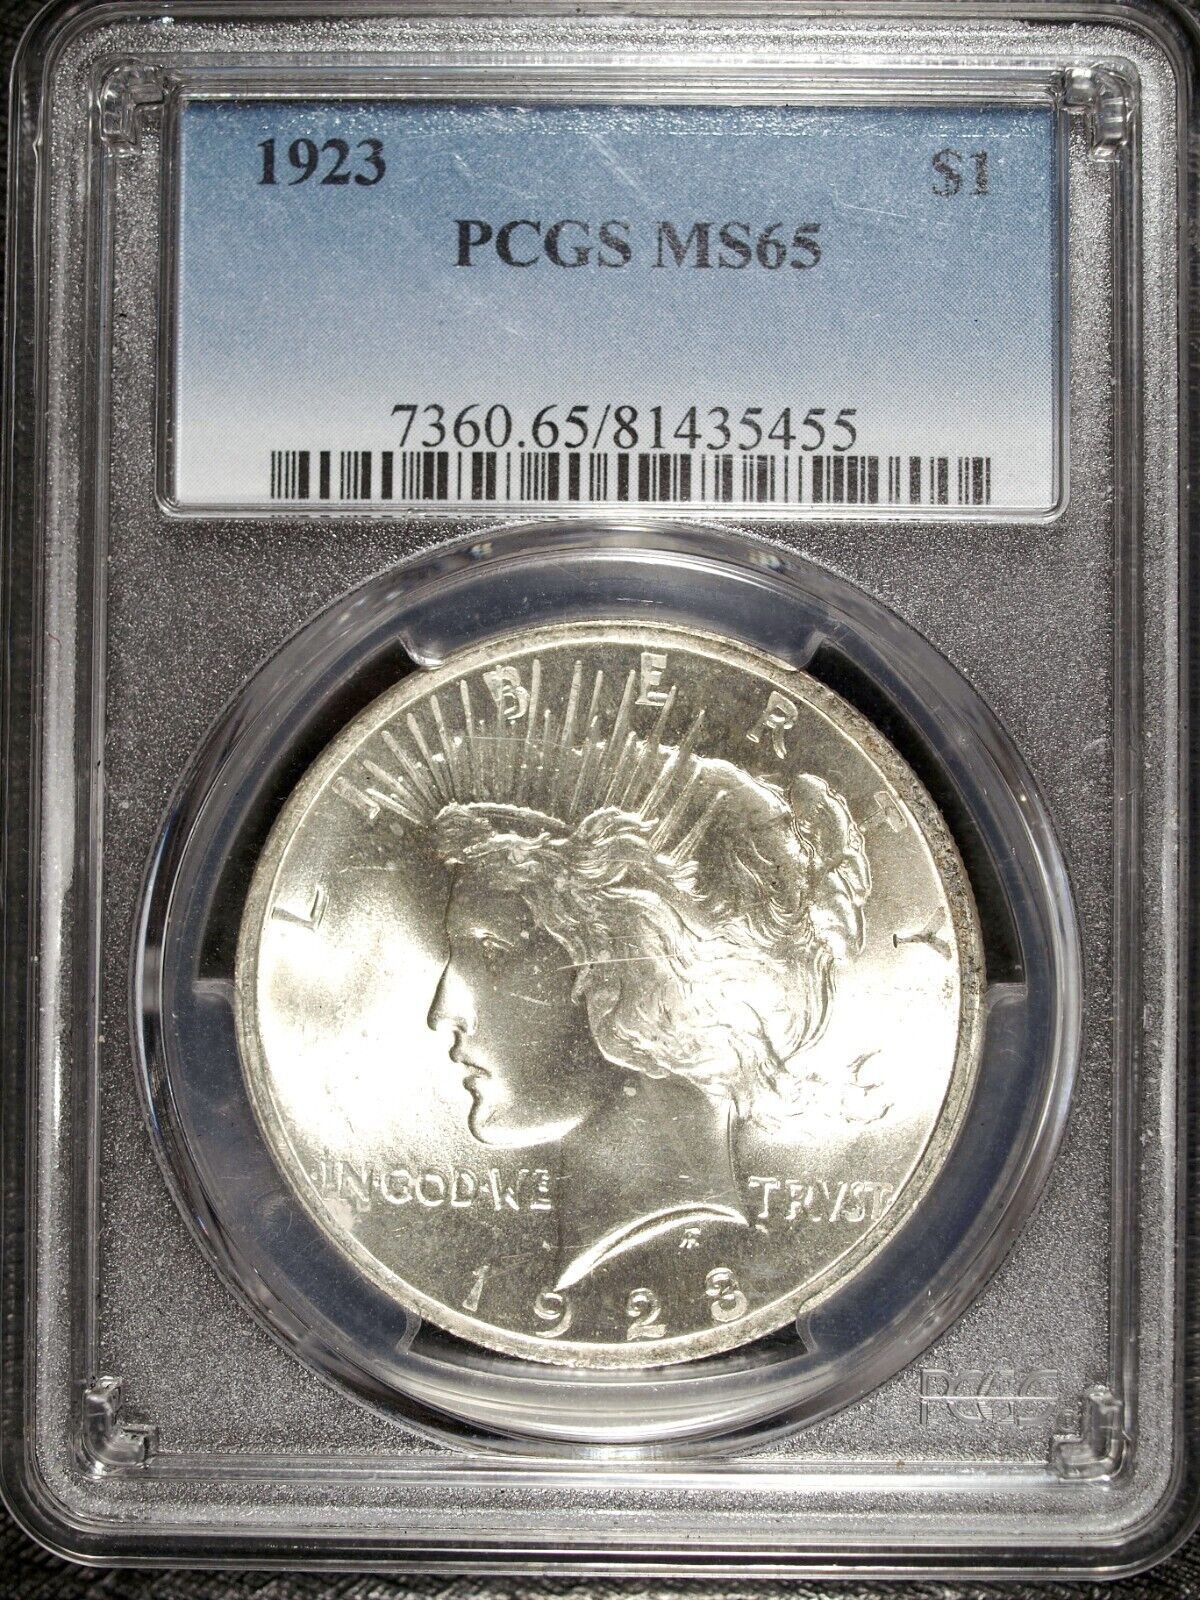 1923 P PCGS MS 65 Peace Silver Dollar ☆☆ Great Collectible ☆☆ Great For Sets 455